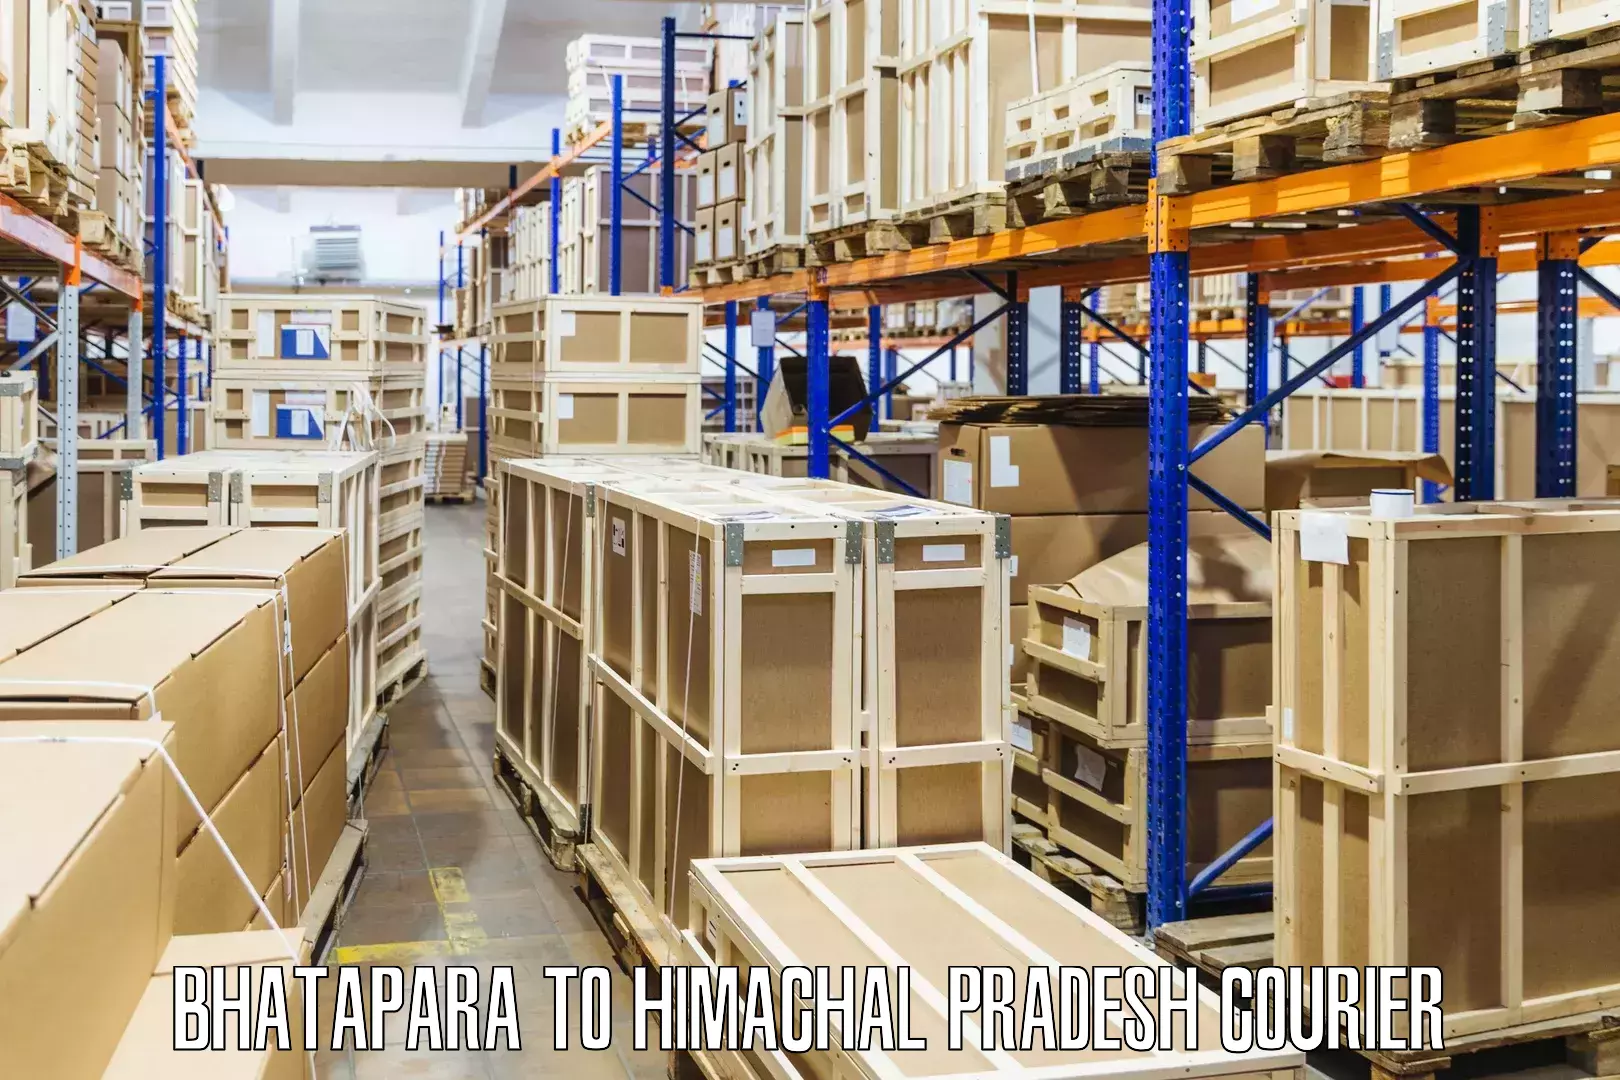 State-of-the-art courier technology Bhatapara to Himachal Pradesh